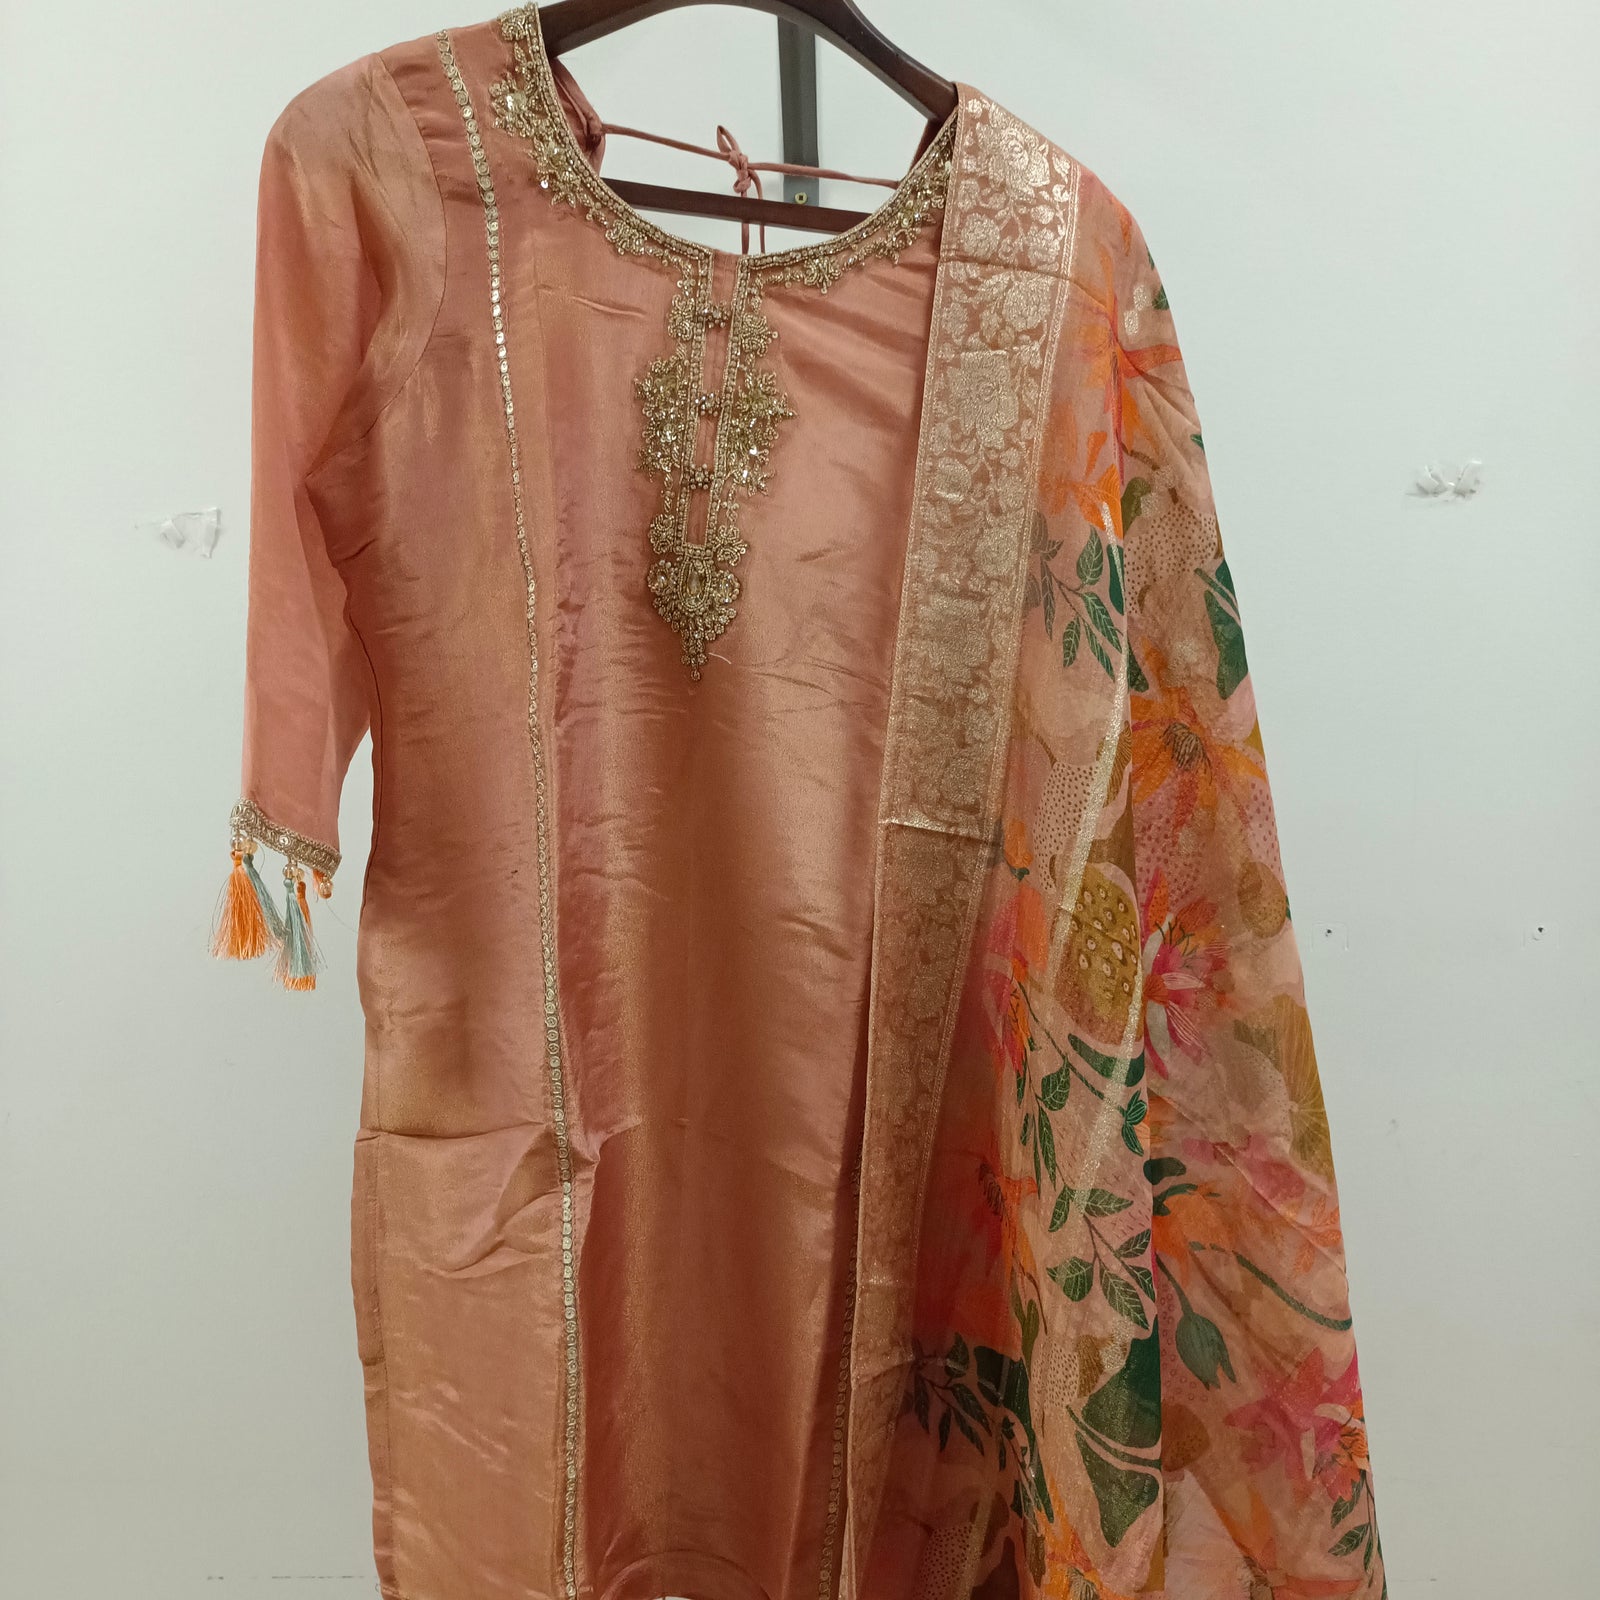 Banarsi embroidered skirt suit with printed dupatta